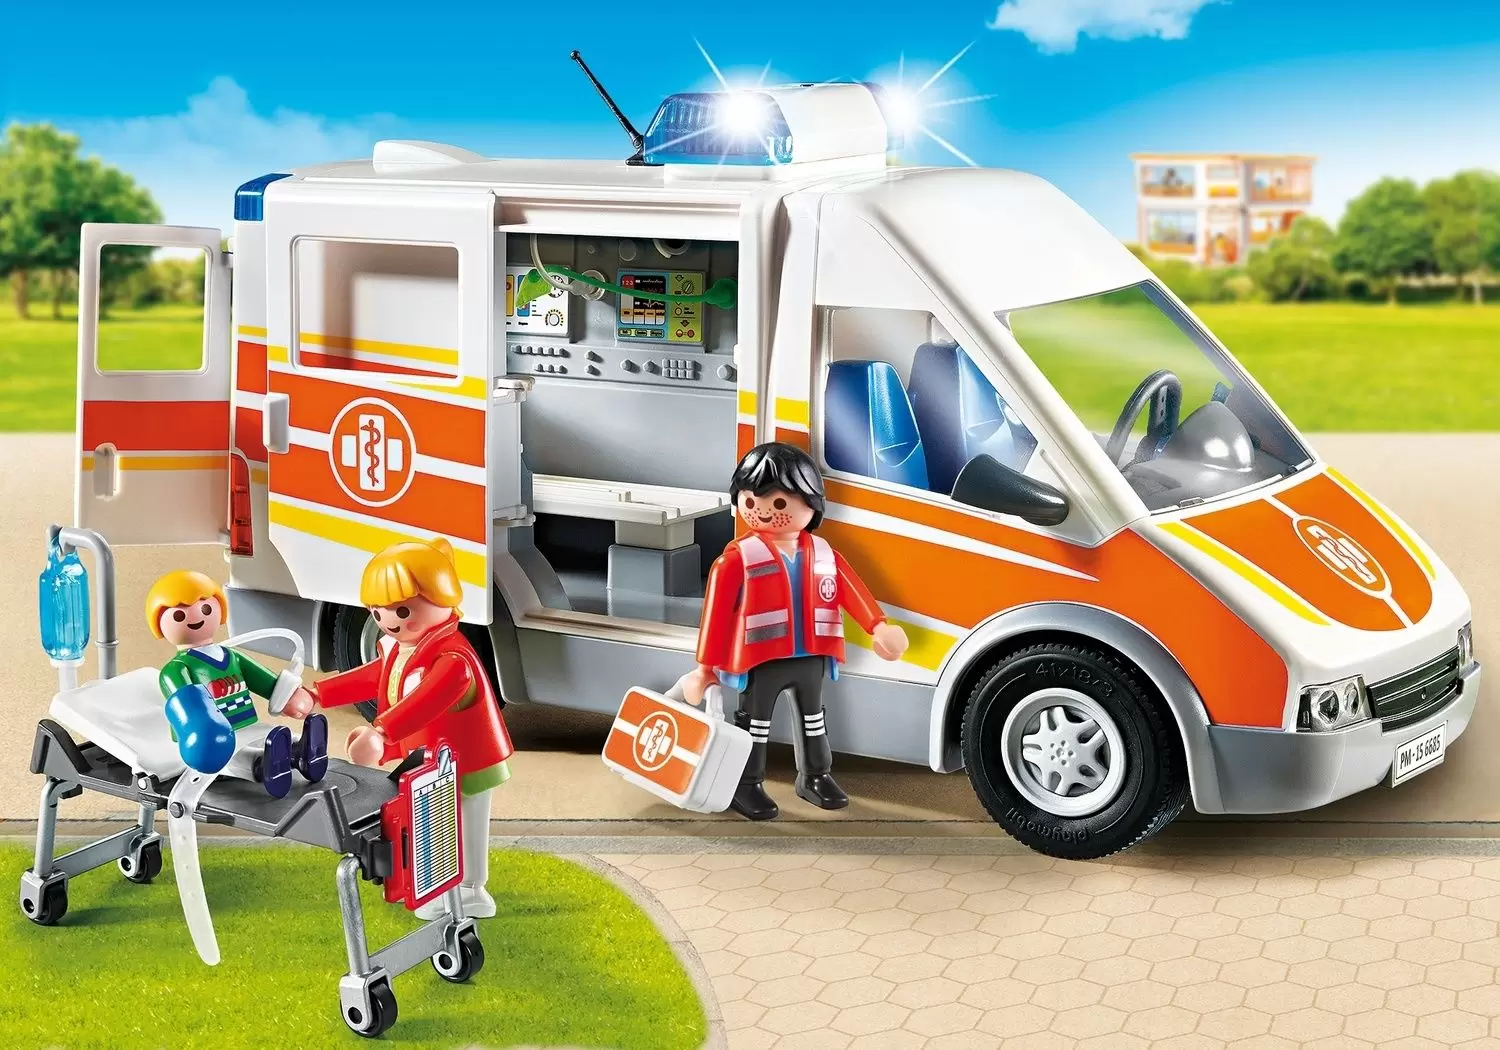 Playmobil Rescuers & Hospital - Ambulance with Lights and Sound